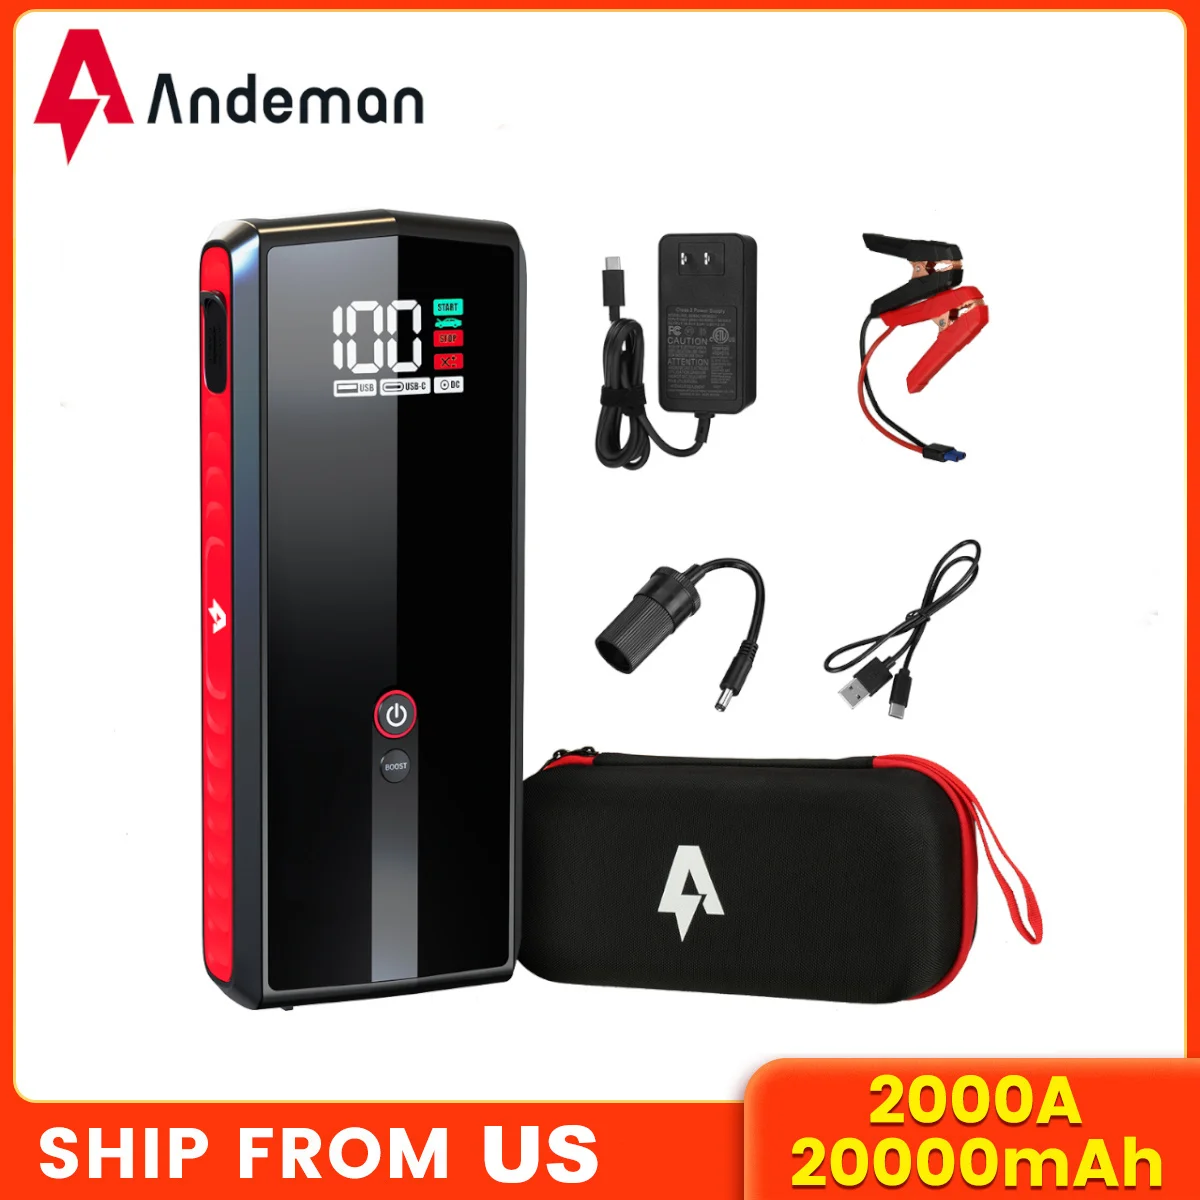 

Andeman 20000mAh Starting Charger for Car 2000A Portable Jump Starter Power PD65W Quick charge Starter Booster Current Device